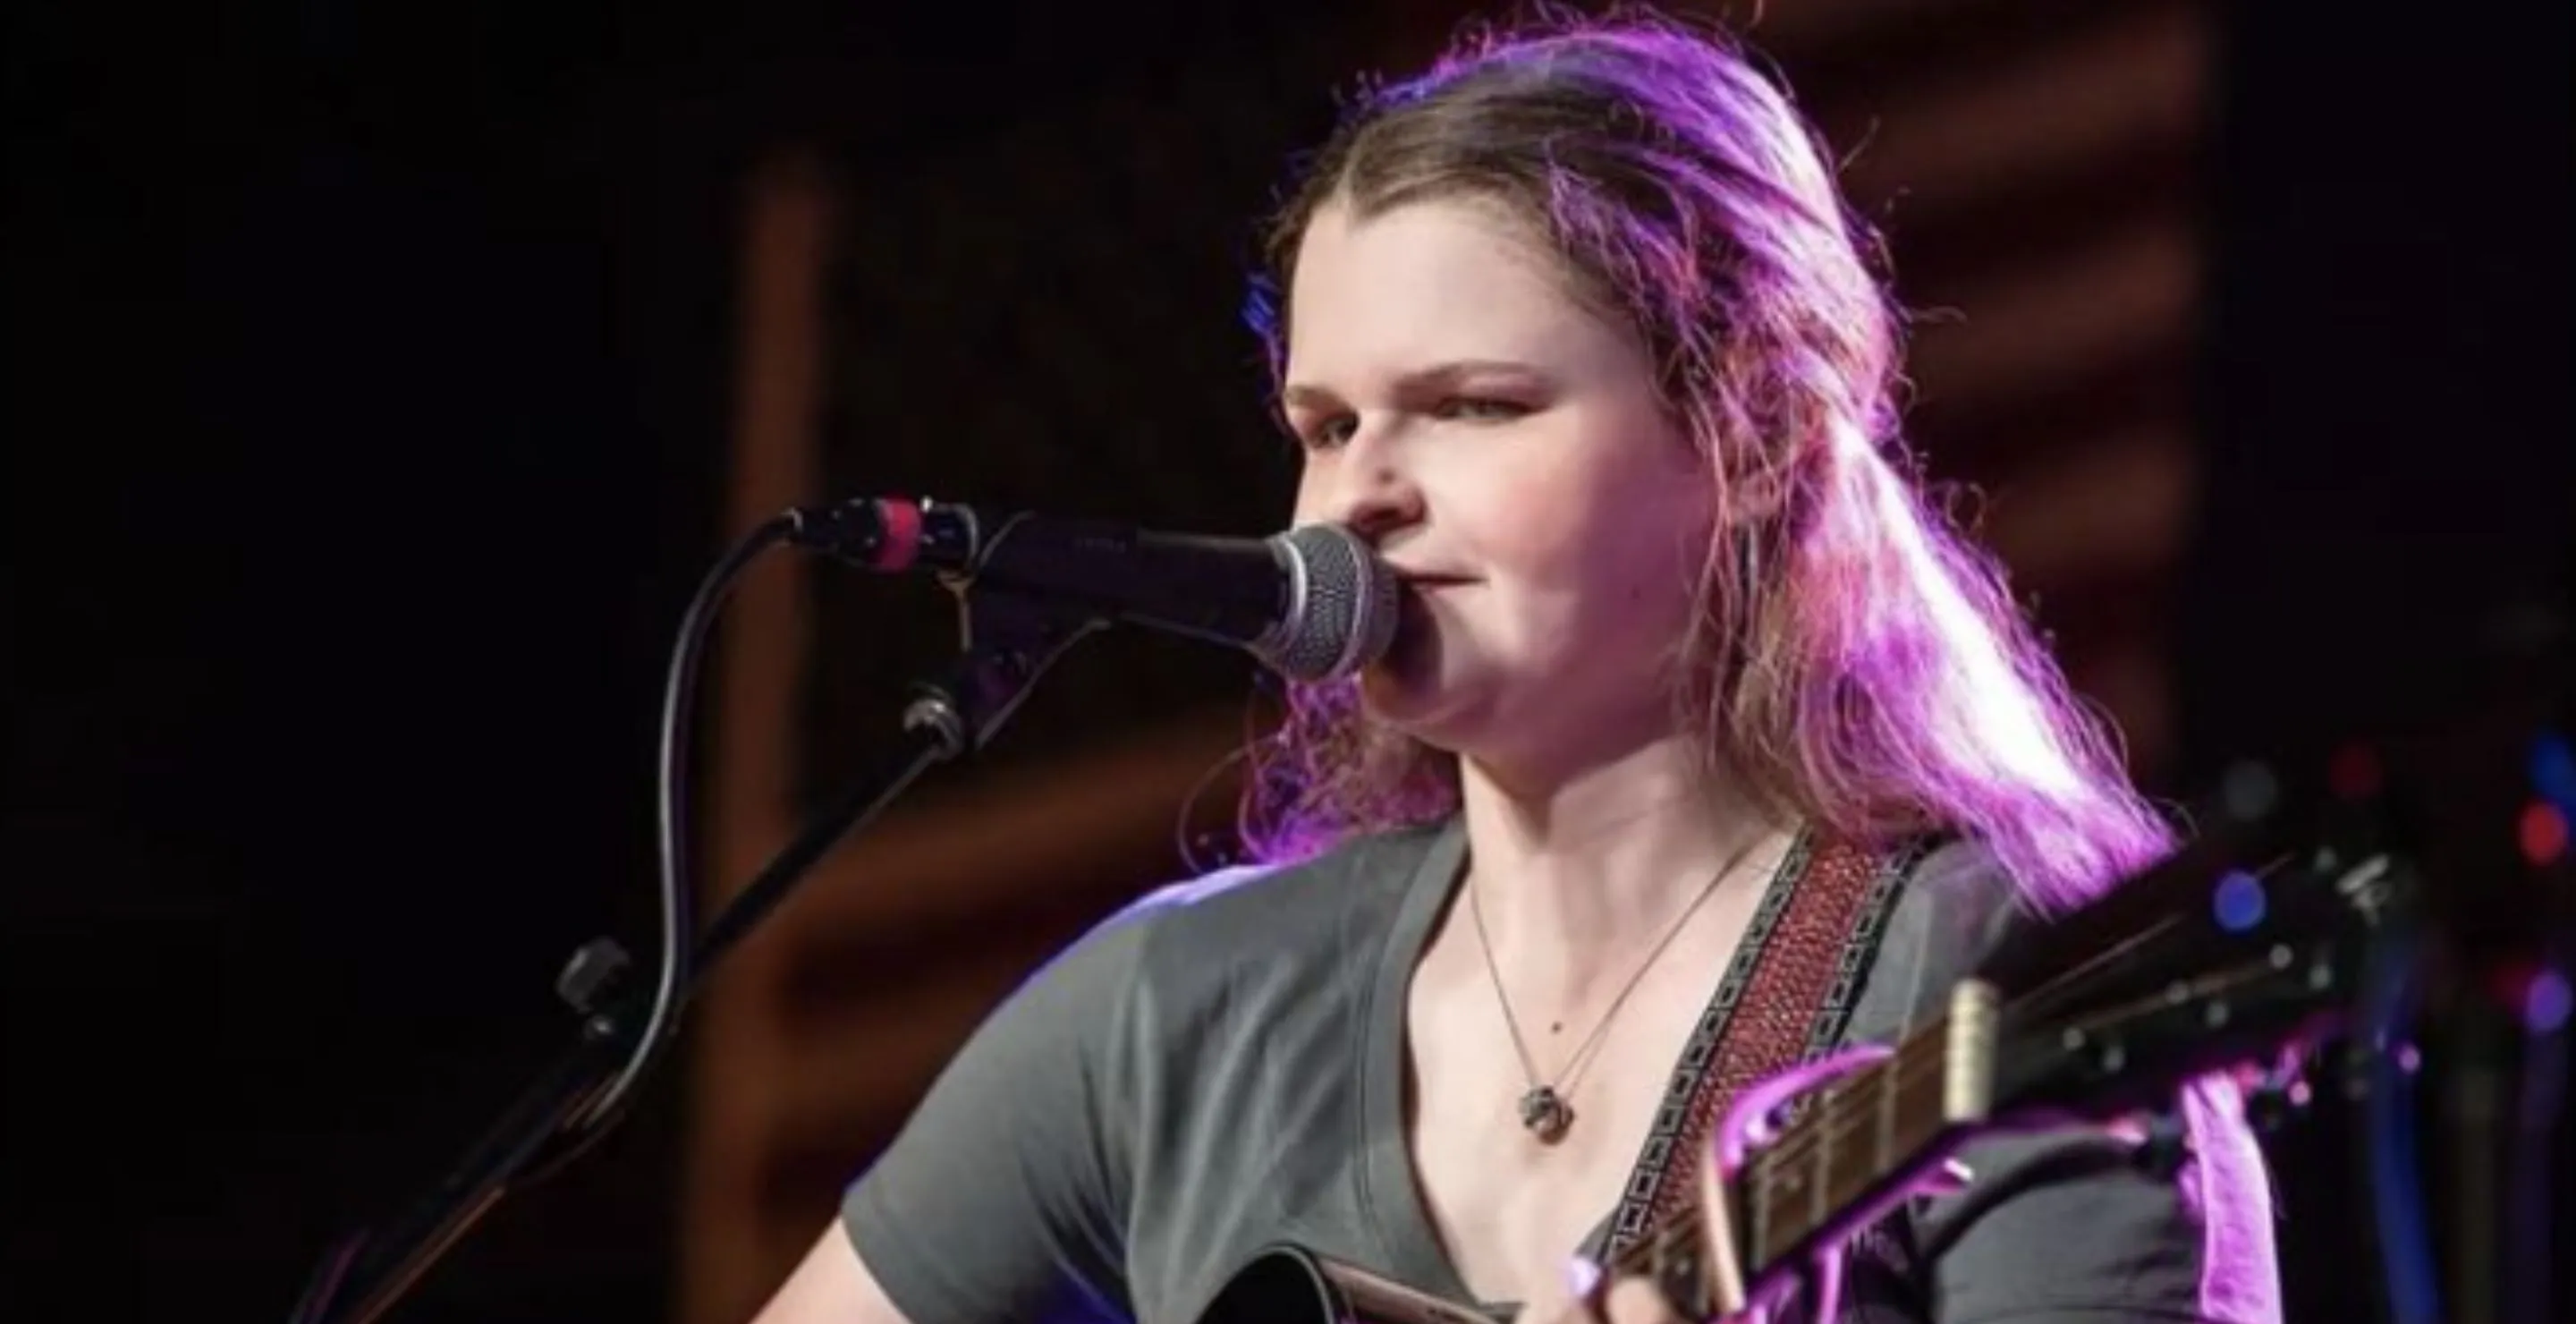 Watch this blind singer live out her dreams during a performance at the Grand Ole Opry